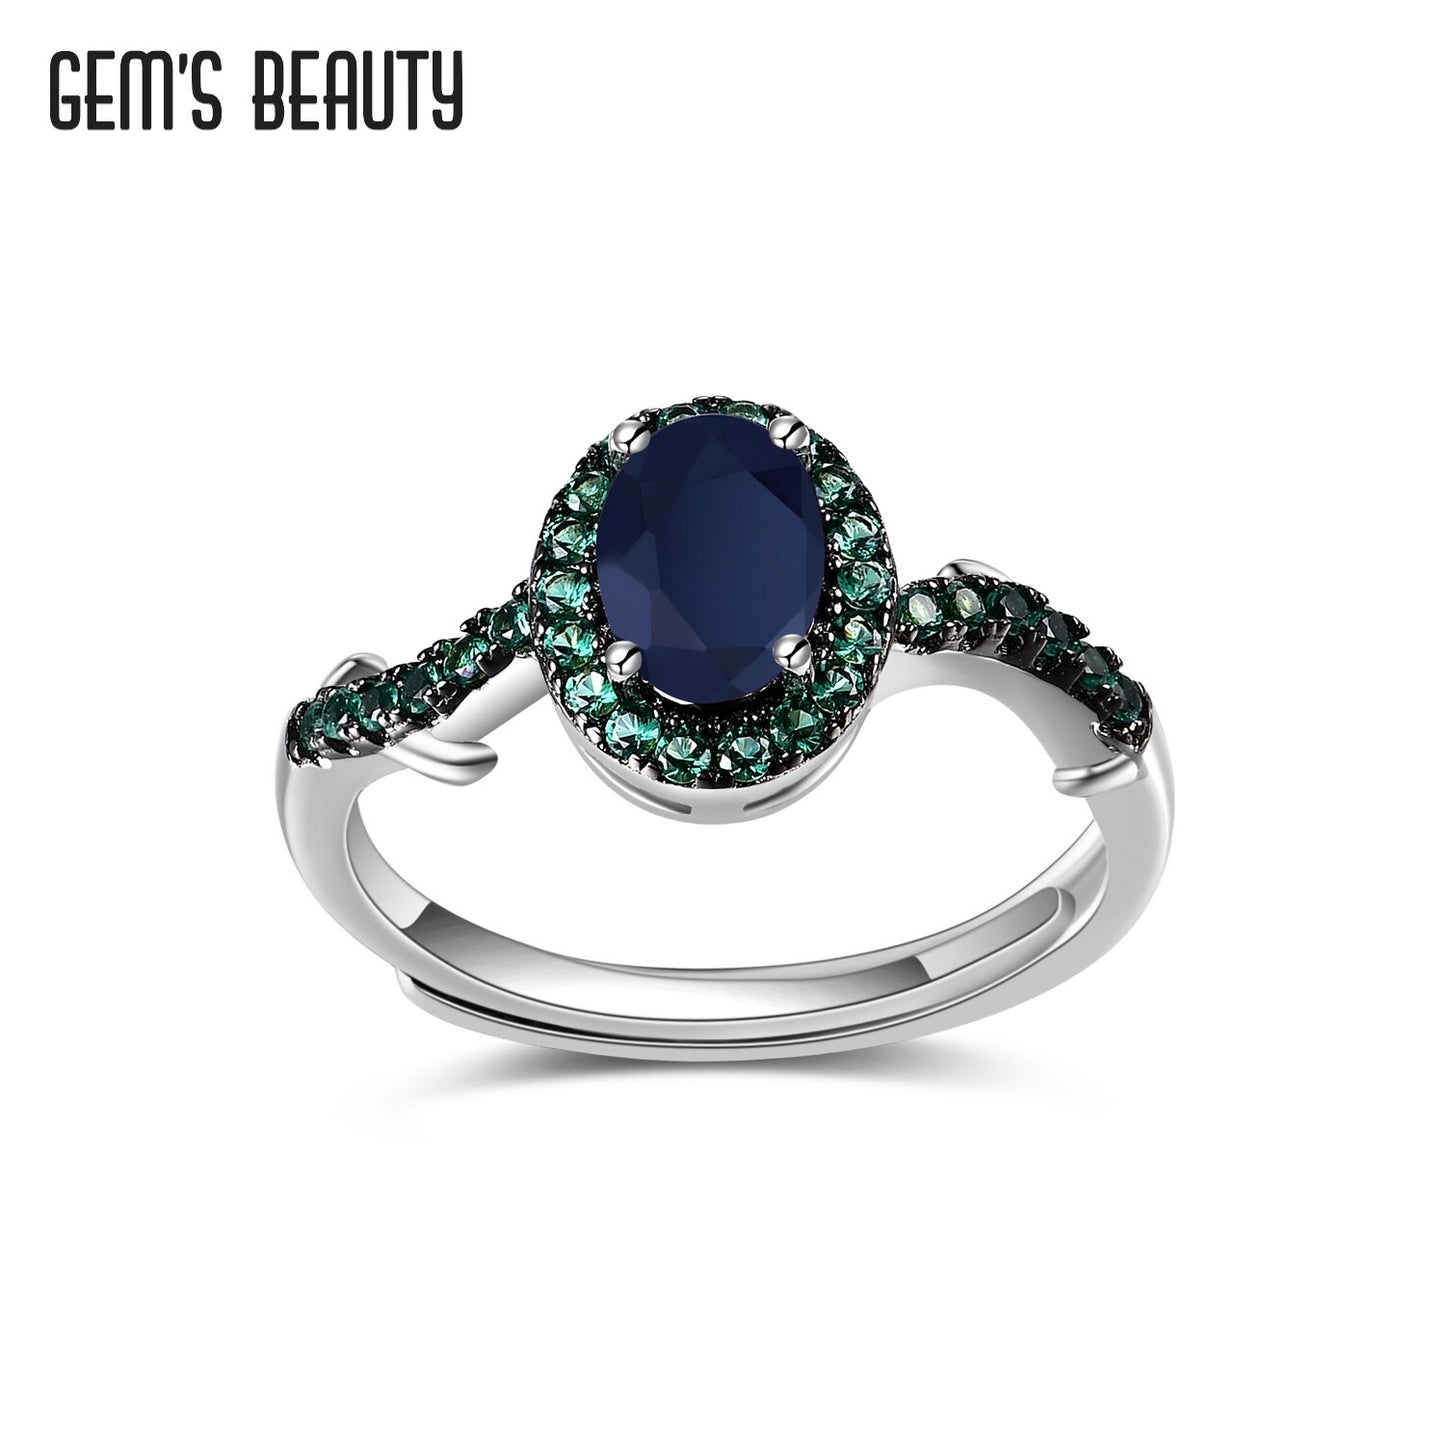 GEM'S BEAUTY 925 Sterling Silver Thorns Bud Adjustable Rings Natural Blue Sapphire Gemstone Handmade Statement Ring For Women